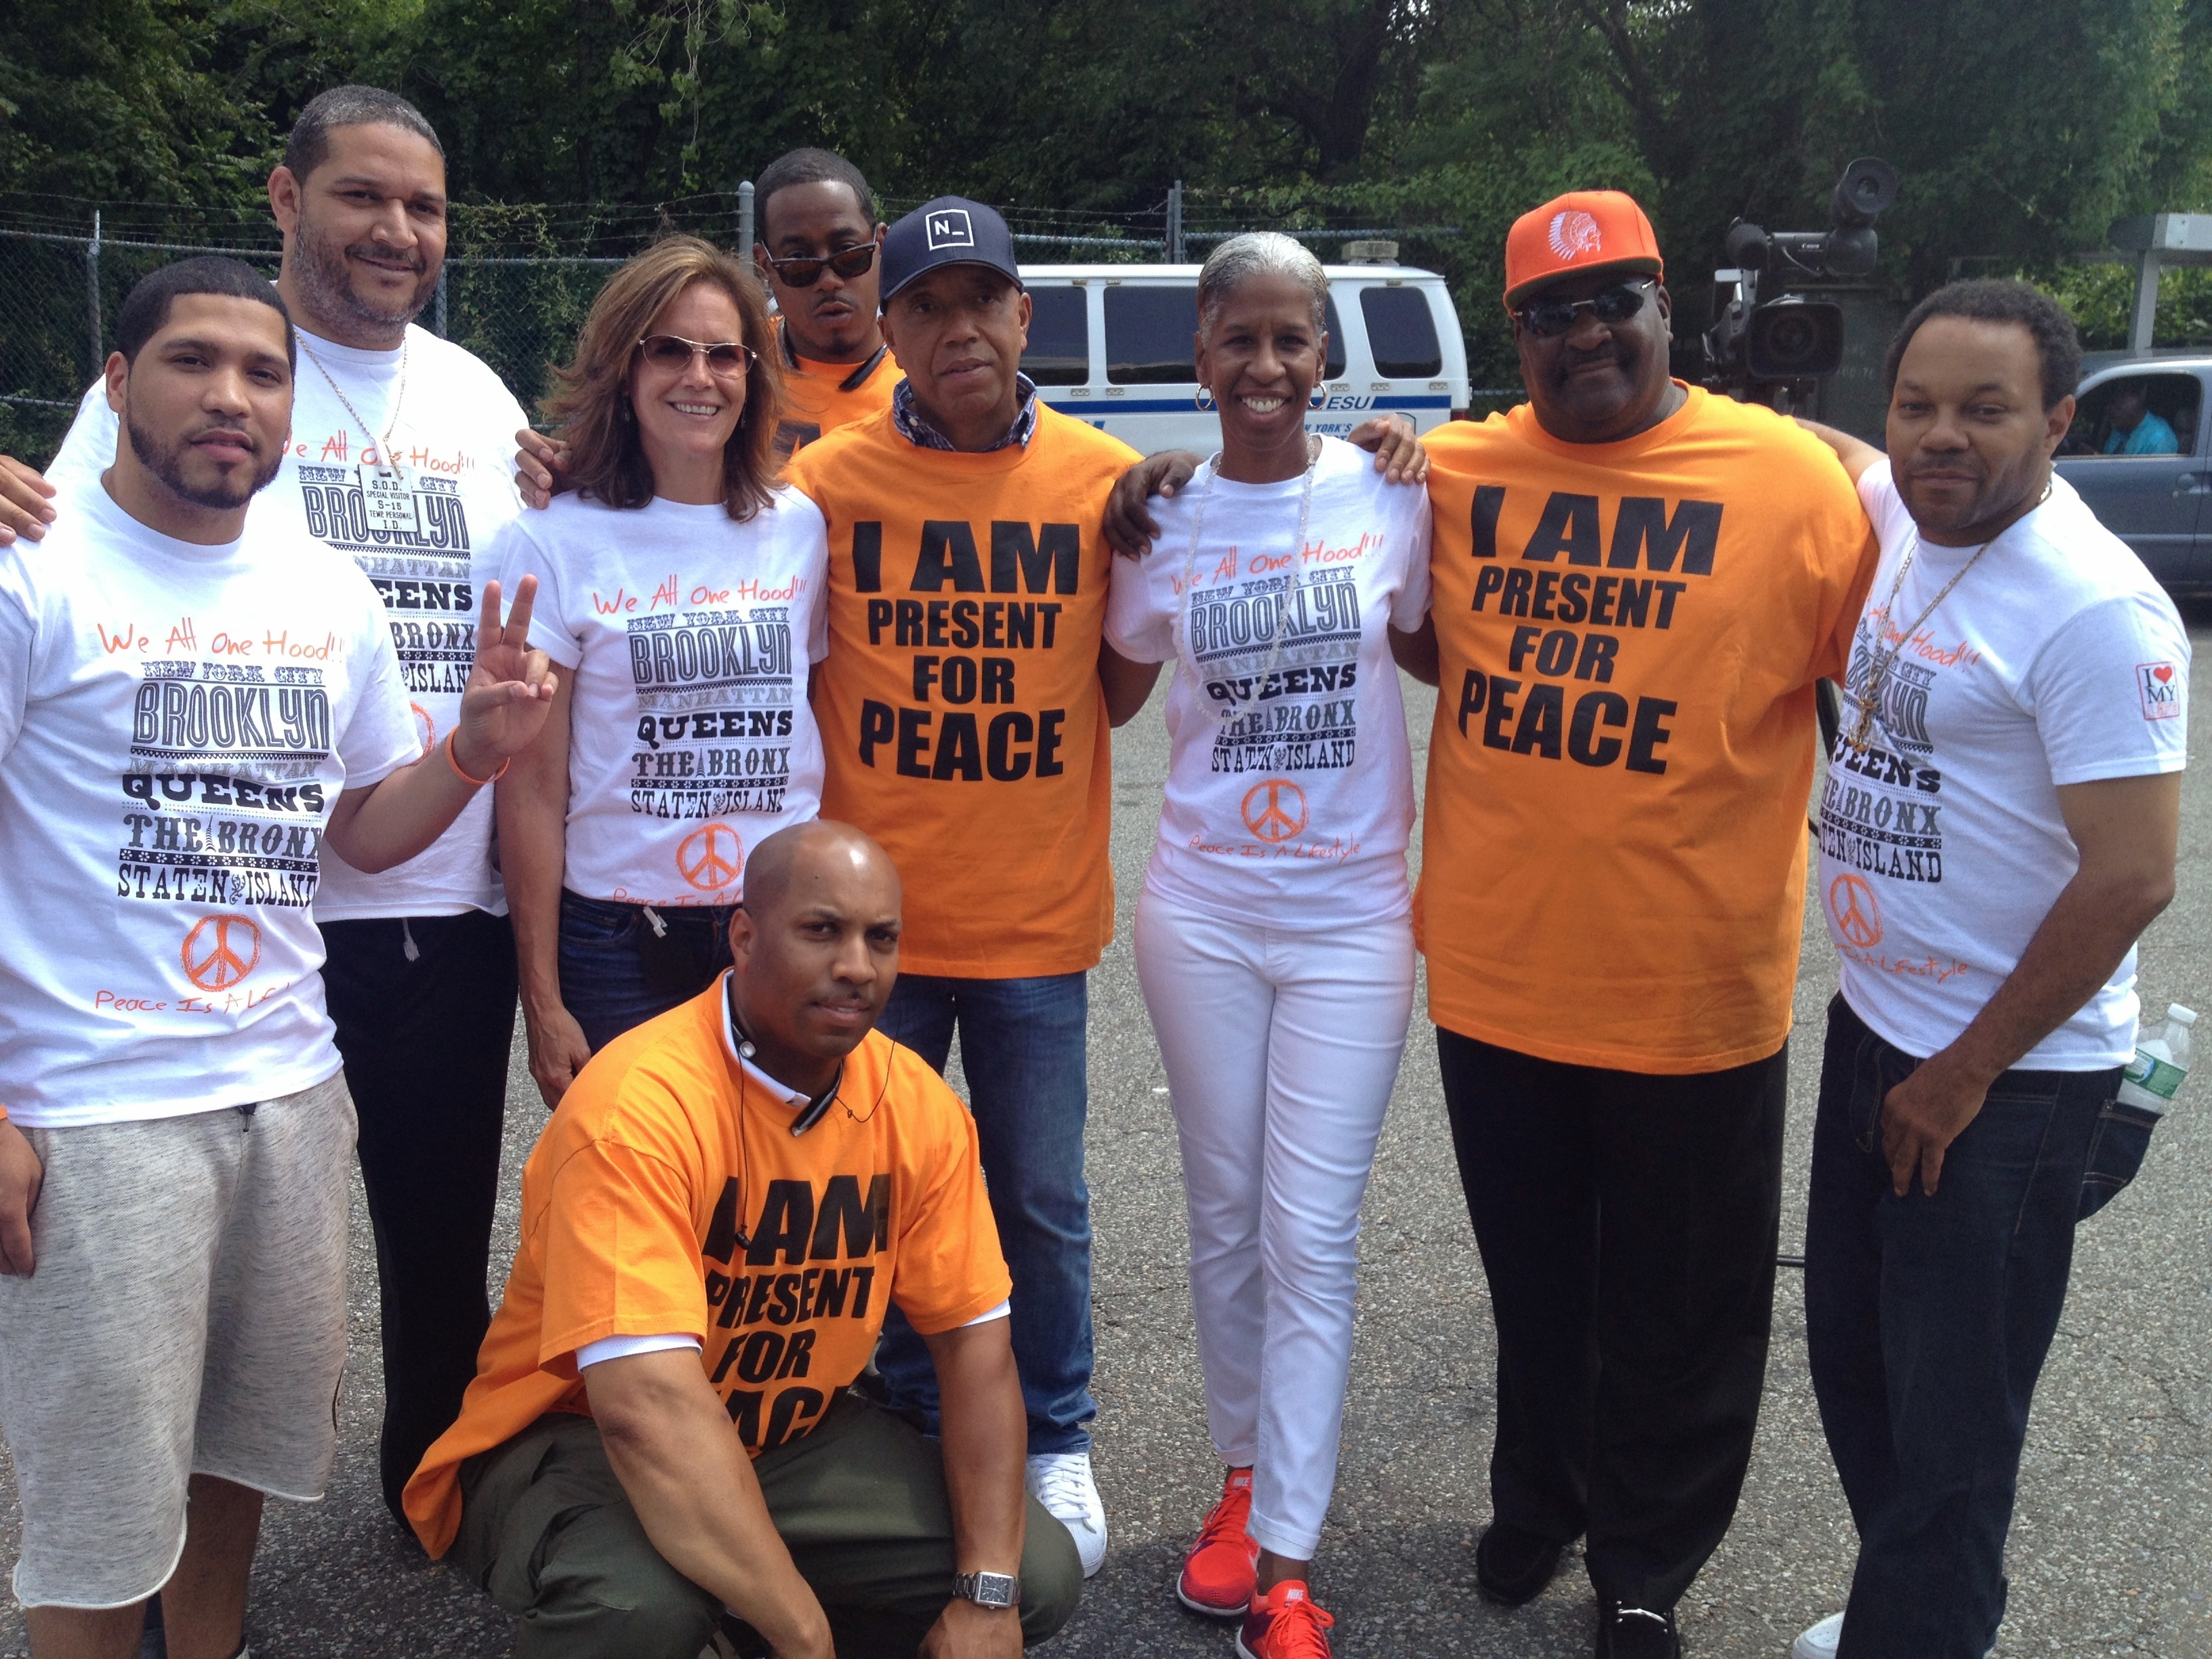 Joining Russell Simmons and LL Cool J in Campaign for Peace